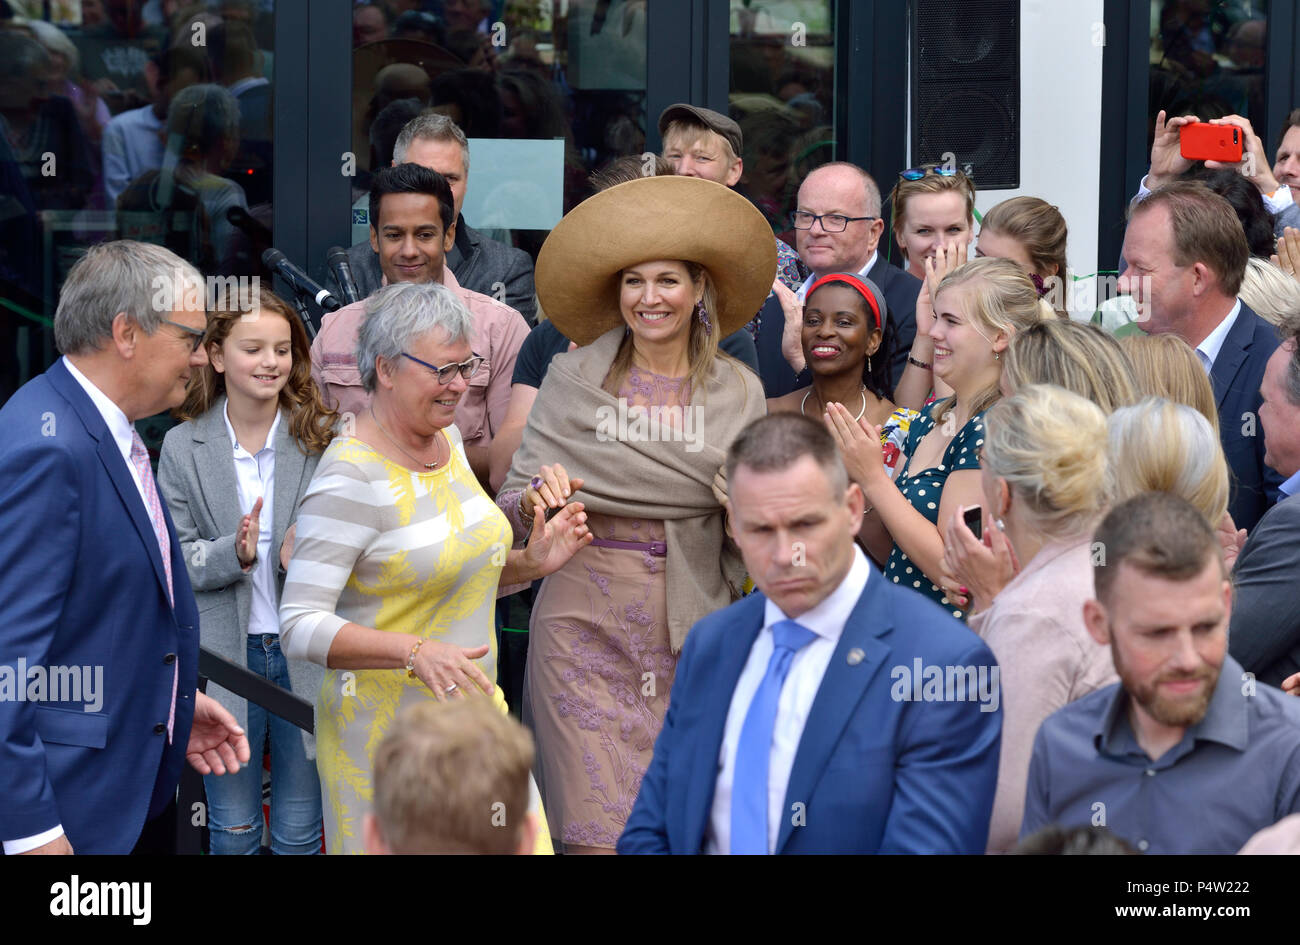 ENSCHEDE, THE NETHERLANDS - JUNE 21, 2018: Queen Maxima from the Netherlands during the re-opening of an old factory called 'The Performance Factory'. Stock Photo